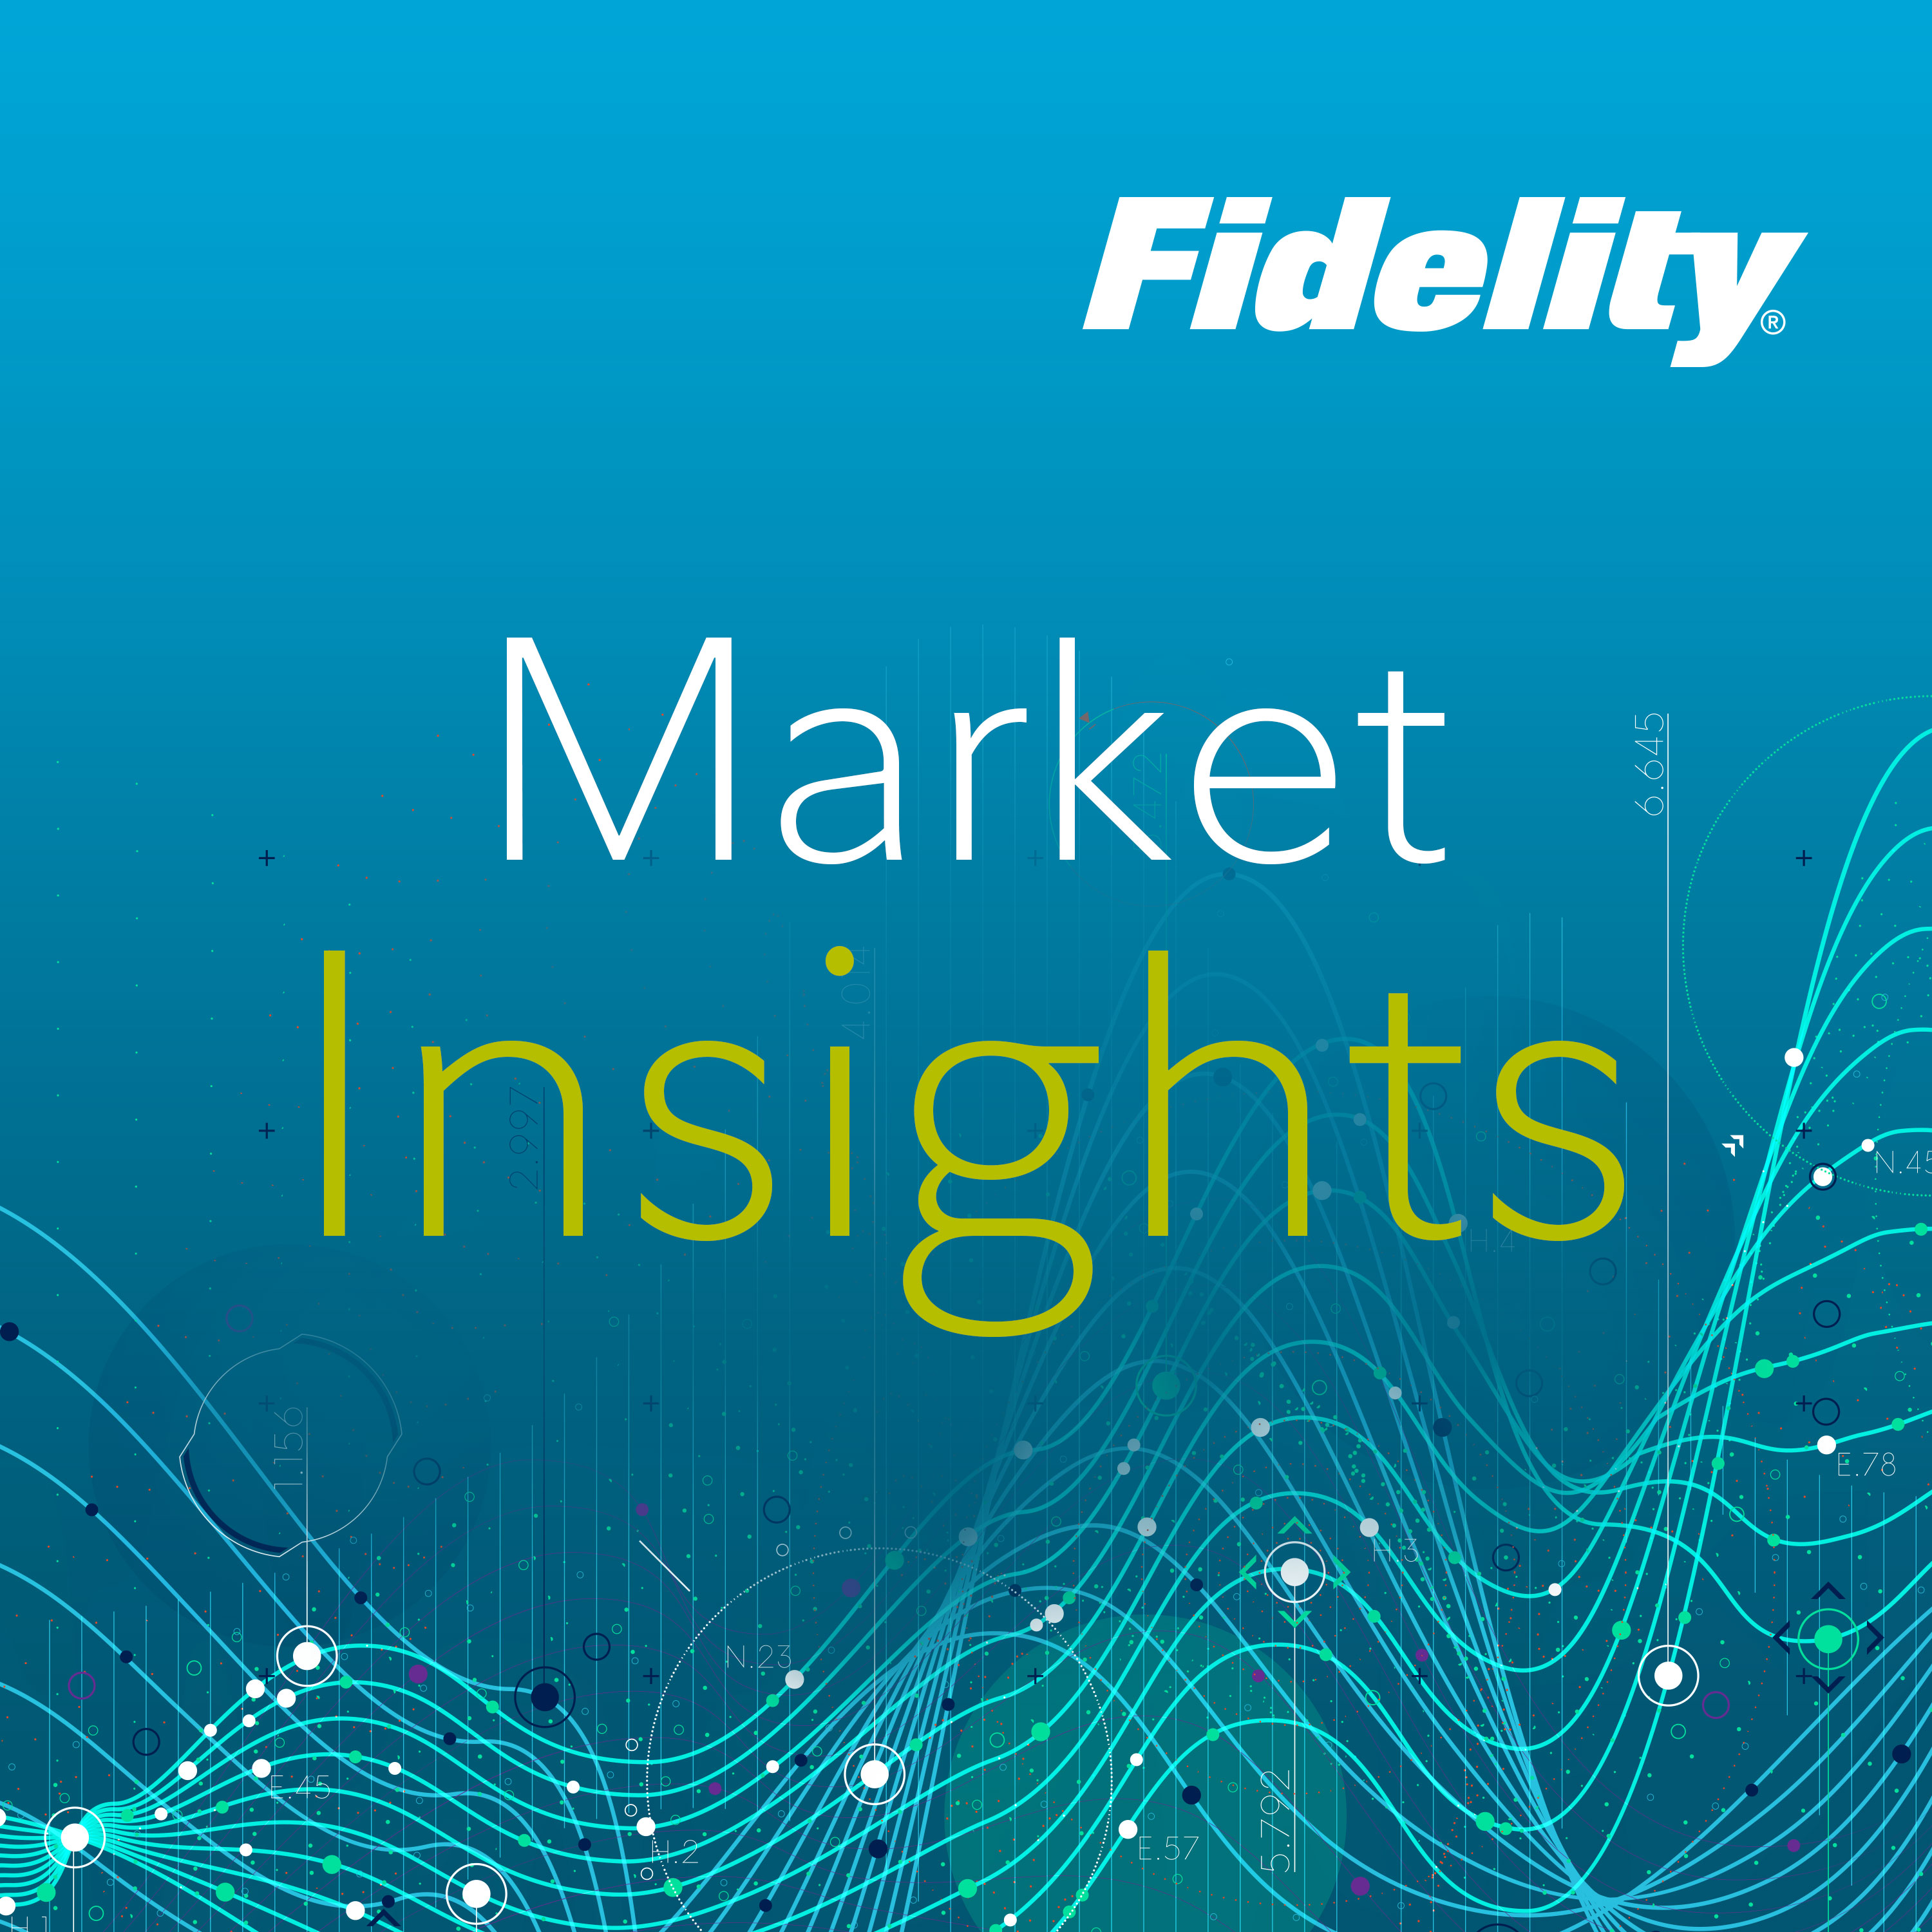 Market Insights: A look into the current market environment